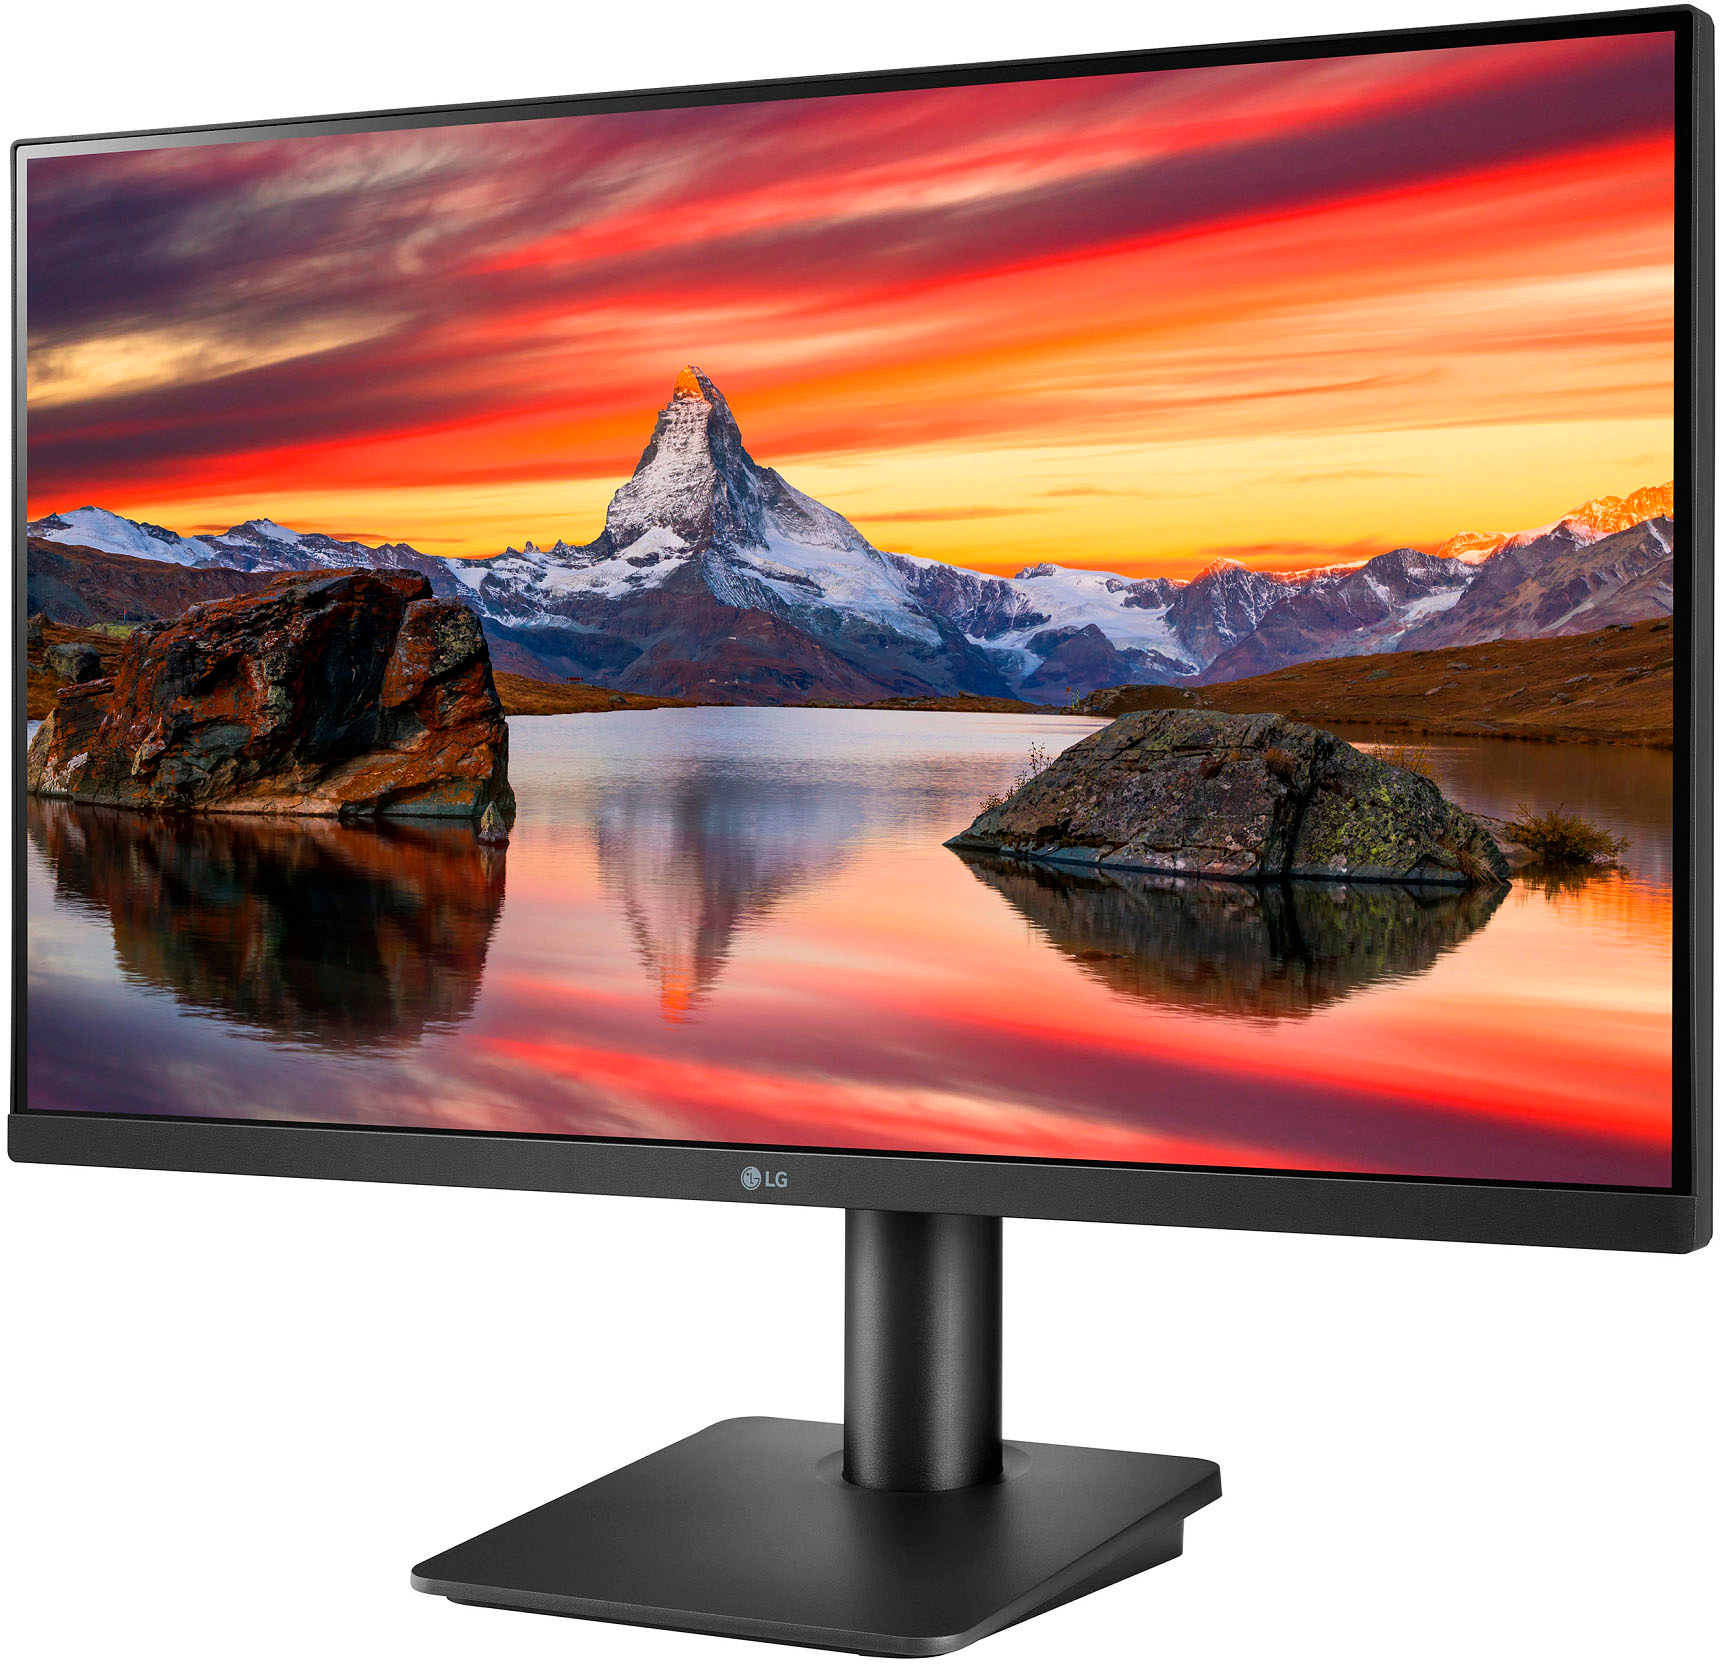 Left View: Samsung - 34” ViewFinity S5 Ultrawide QHD 100Hz AMD FreeSync Monitor with HDR10 (DisplayPort, HDMI) - Black